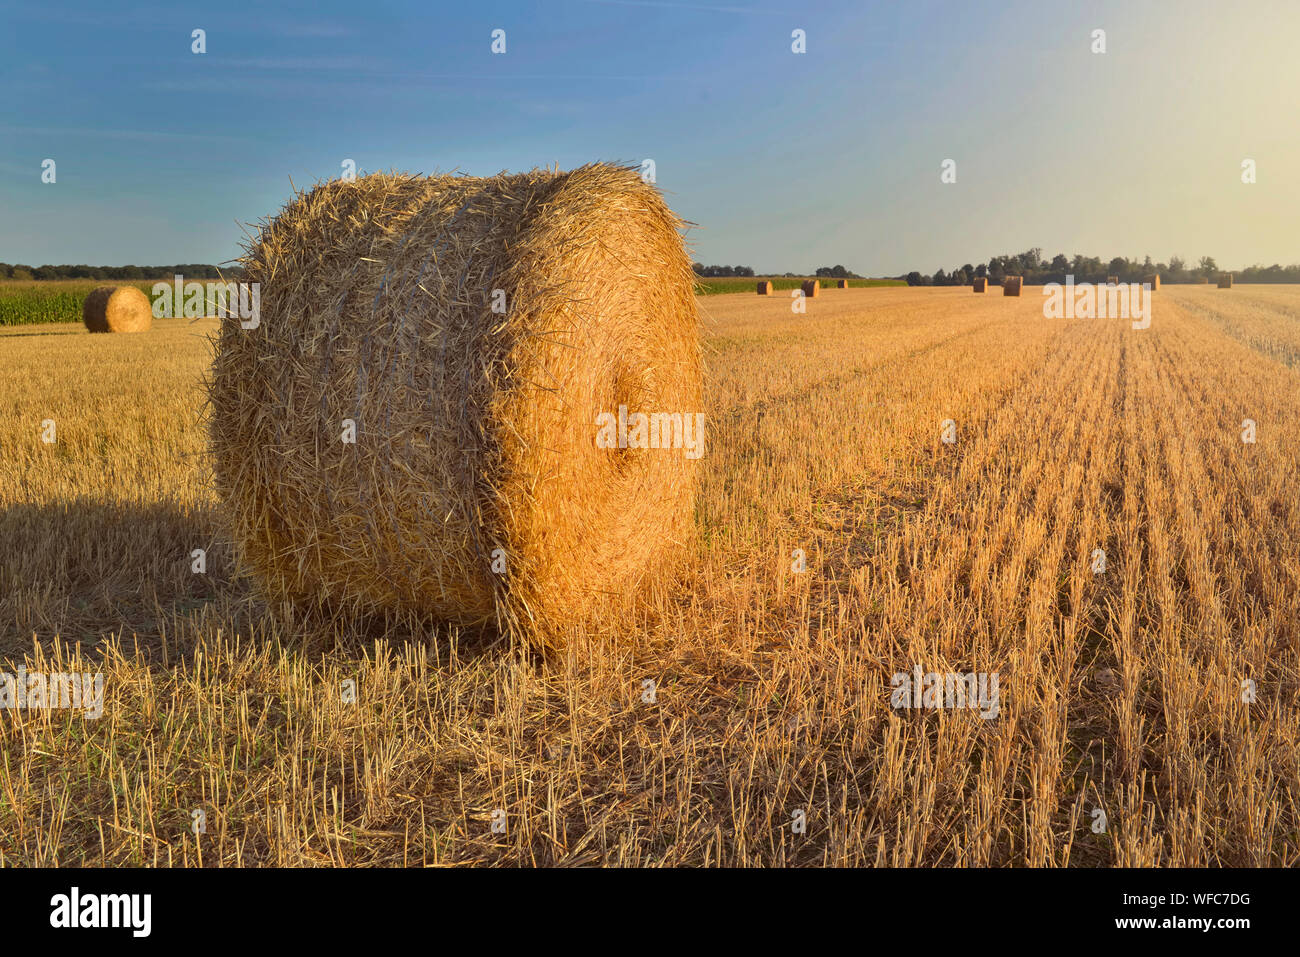 scenic rural landscape with a haybale in a field at sunset Stock Photo